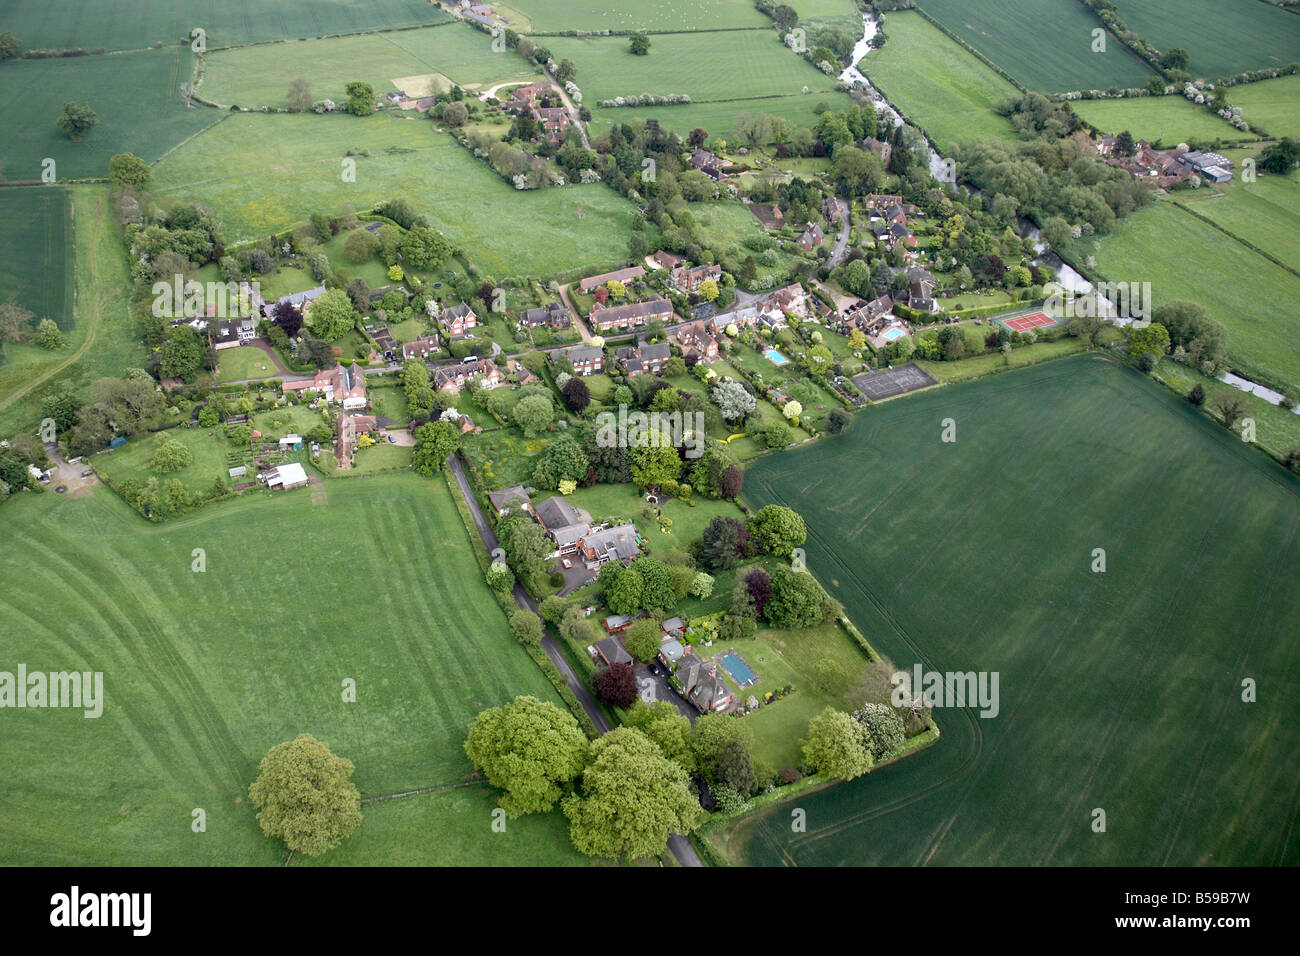 Aerial view south east of Ashow Village Rocky Lane country houses fields forestation tennis courts River Avon Warwickshire CV8 U Stock Photo